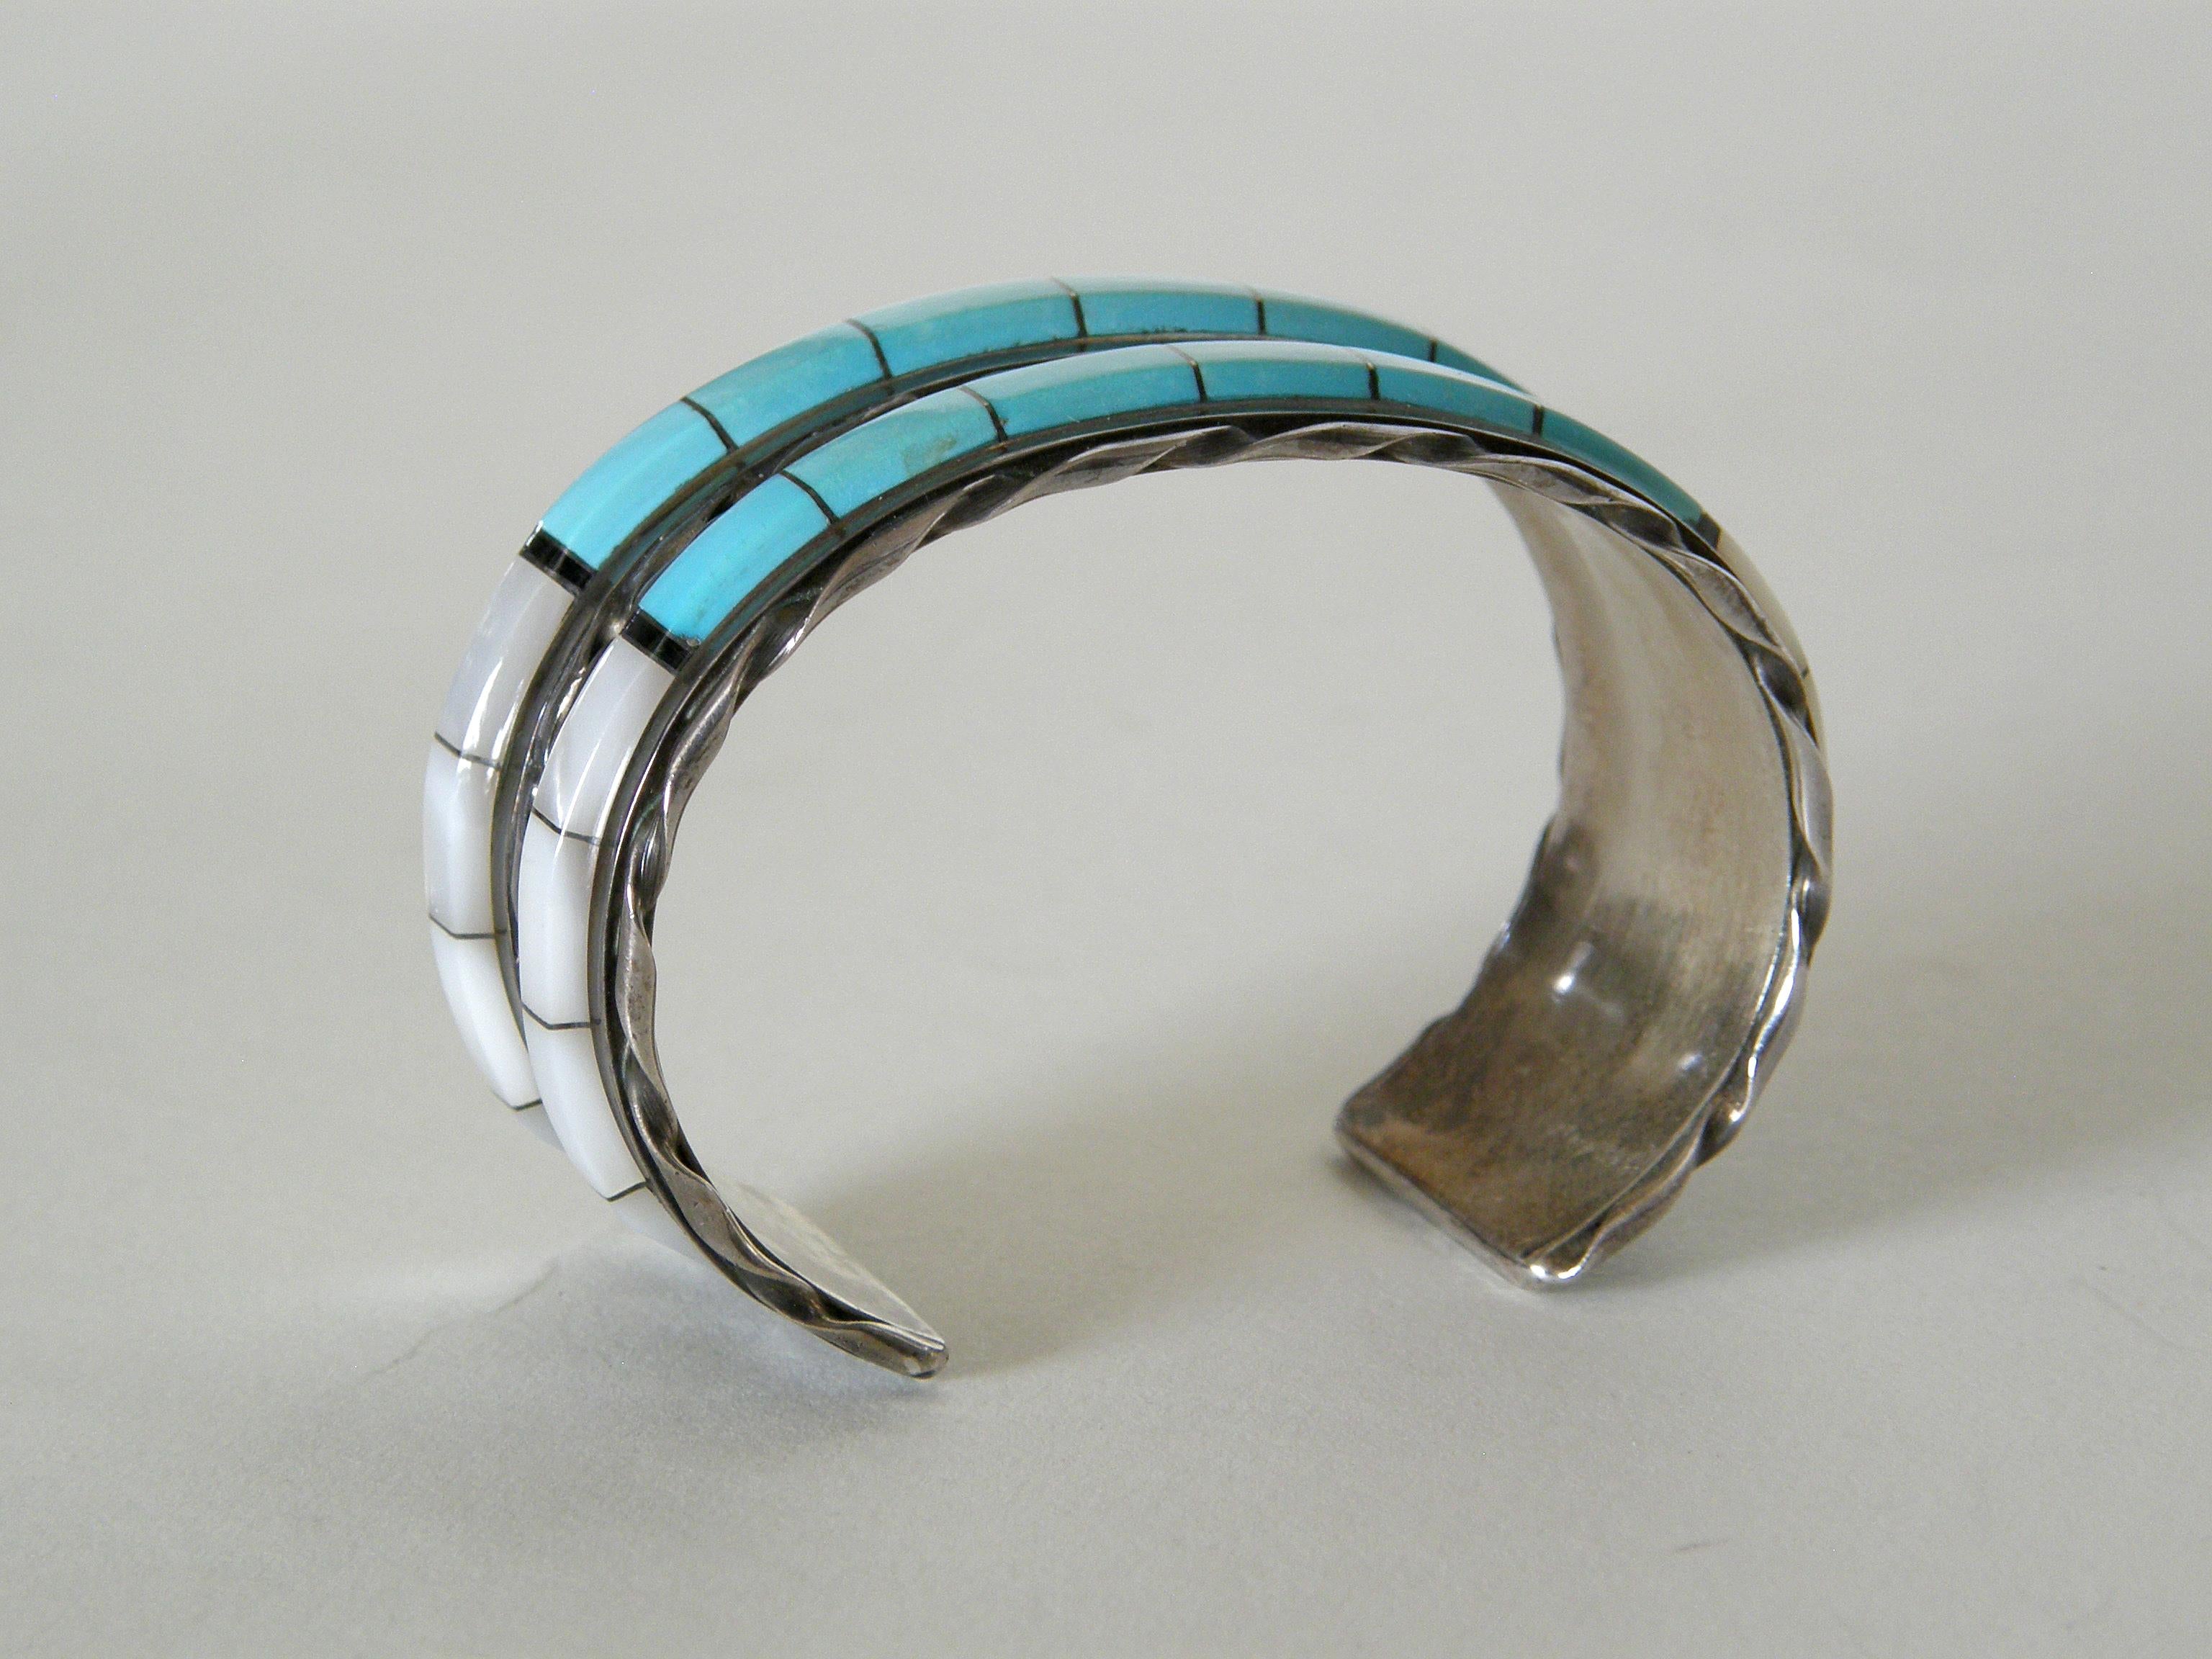 Women's or Men's Sterling Cuff Bracelet by Zuni Artists Martin and Esther Panteah